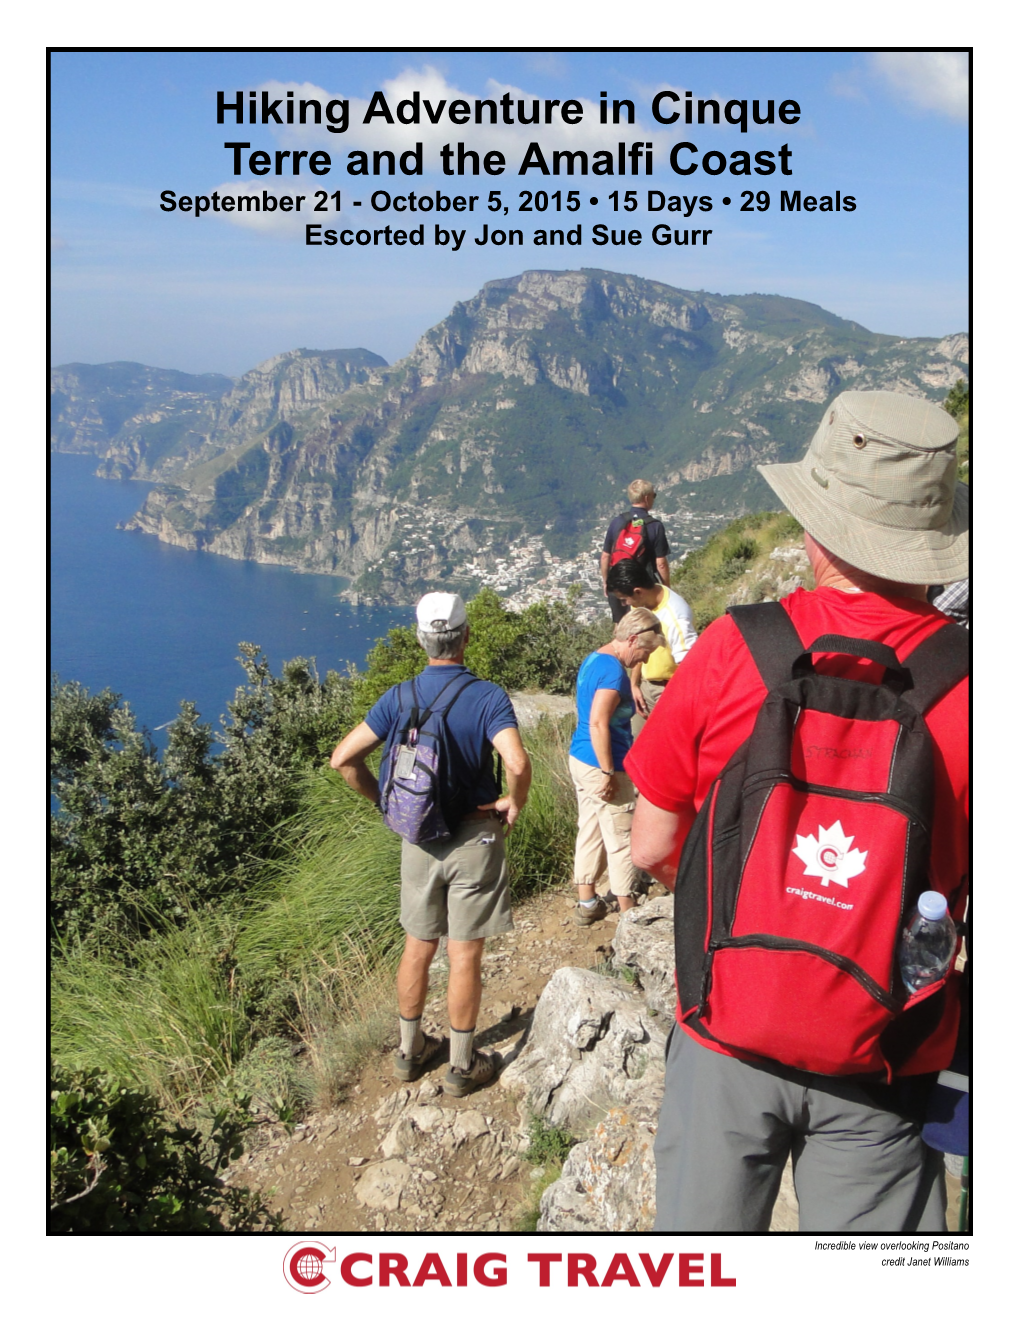 Hiking Adventure in Cinque Terre and the Amalfi Coast September 21 - October 5, 2015 • 15 Days • 29 Meals Escorted by Jon and Sue Gurr